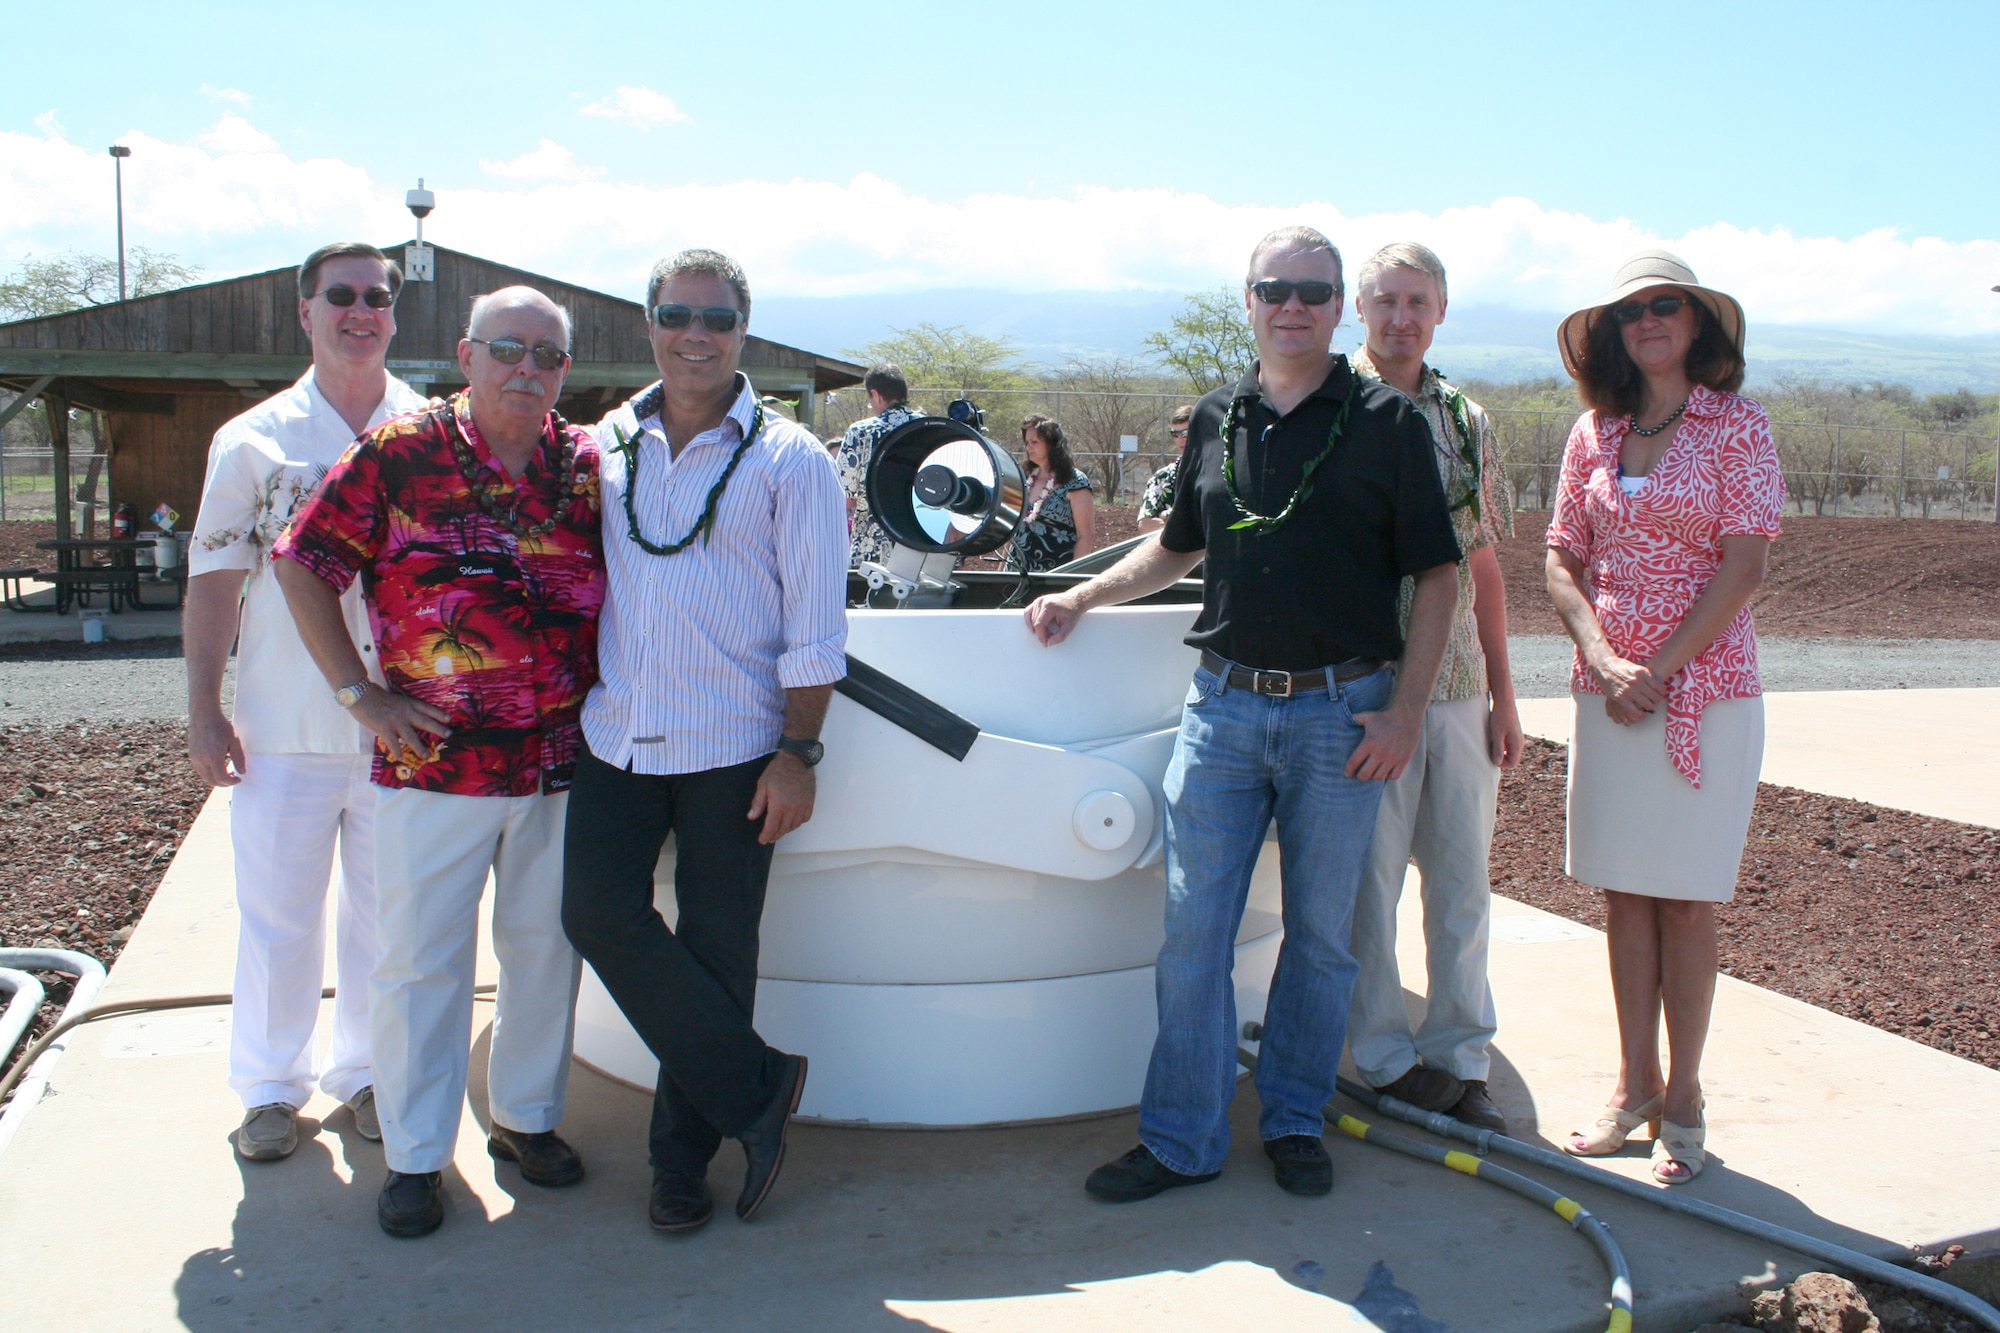 August 6, 2013, dedication of the remote telescope at the AFRL Air Force Maui Optical and Supercomputing site with representatives from AFRL, Georgia Tech, University of Hawaii, Schafer and Boeing. (Larry Wallman/AFRL photo)